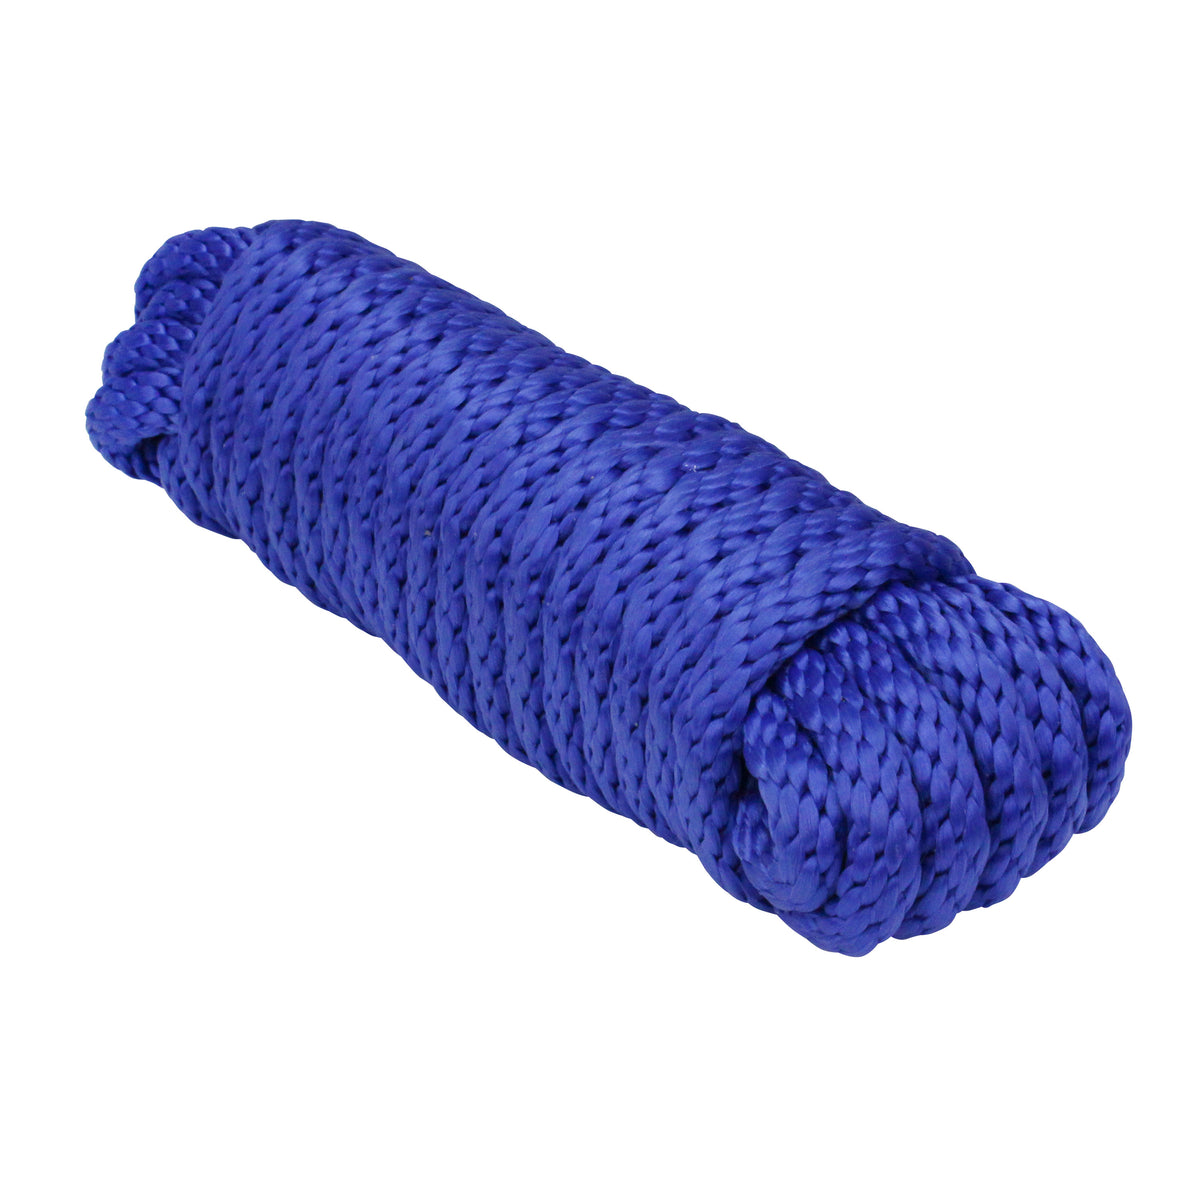 Extreme Max 3008.0073 Solid Braid MFP Utility Rope - 1/2" x 10', Blue